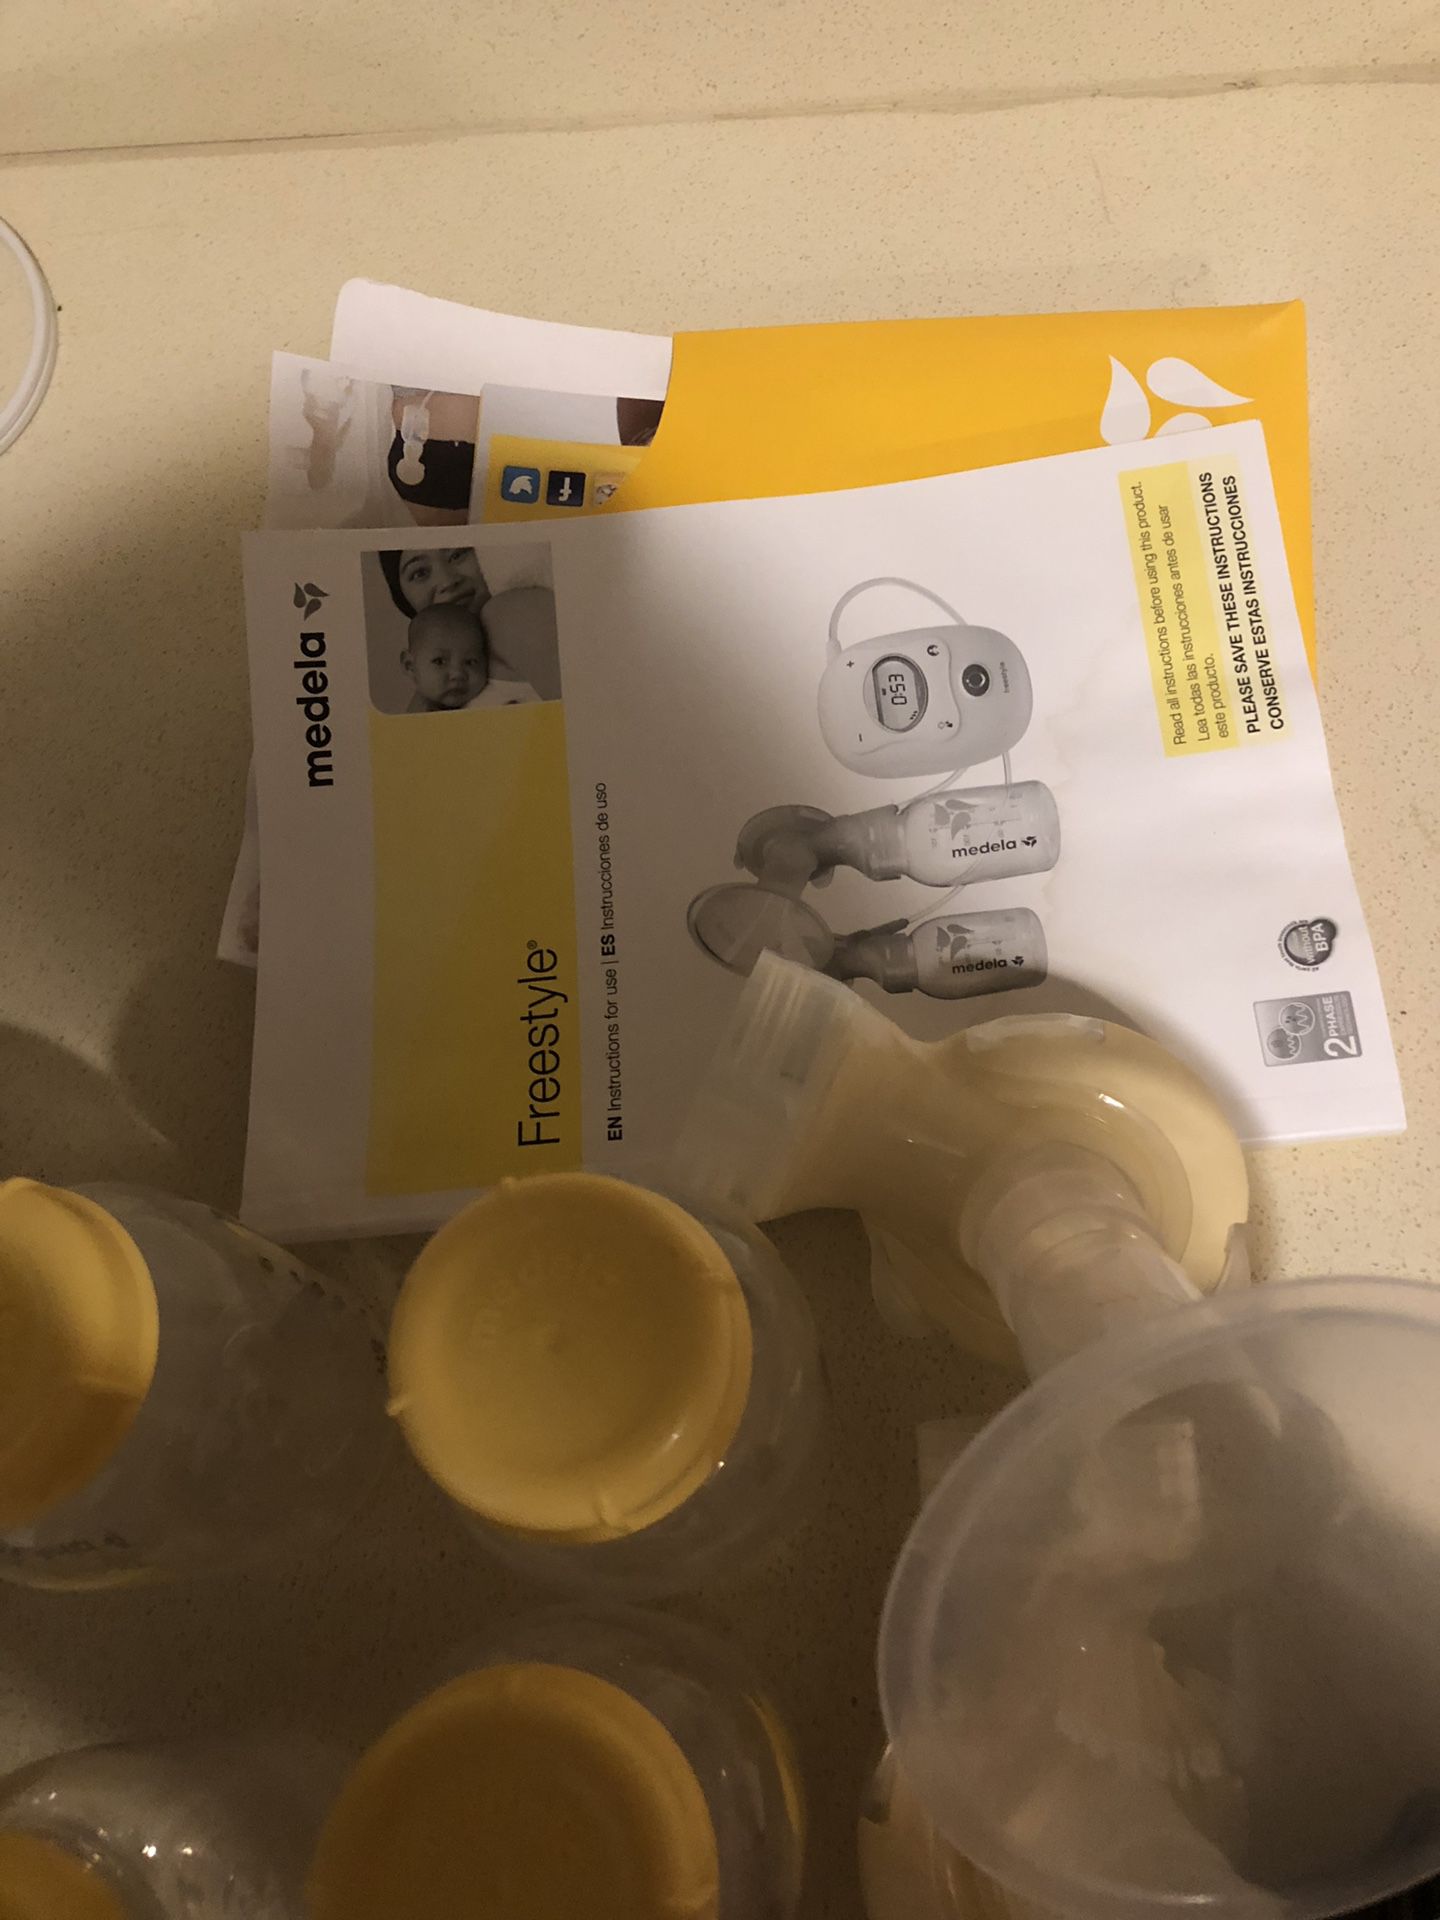 Medela soothing hydrogel pads, nipple shield and nipple lanolin cream for  Sale in Bellevue, WA - OfferUp